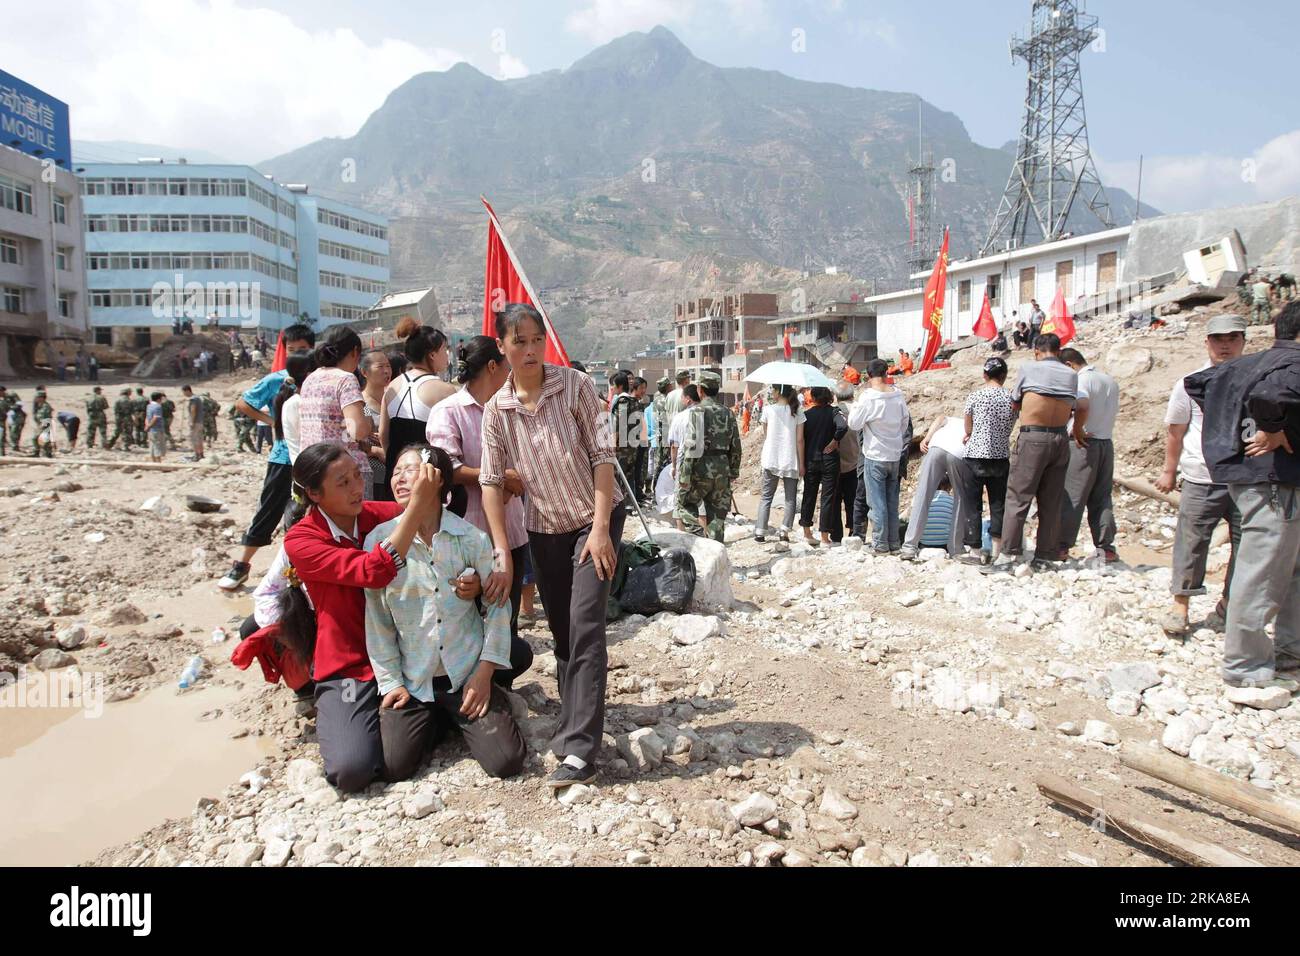 Bildnummer: 54285487  Datum: 09.08.2010  Copyright: imago/Xinhua (100809) -- ZHOUQU, Aug. 9, 2010 (Xinhua) -- Local residents mourn in landslide-hit Zhouqu County, Gannan Tibetan Autonomous Prefecture in northwest China s Gansu Province, Aug. 9, 2010. The death toll from rain-triggered mudslides in Zhouqu County has risen to 137 as of 4:07 p.m. Monday, with 1,348 others still missing, said the provincial civil affairs department. Rescuers are racing against time in the search for survivors in the mudslide-flattened Zhouqu. (Xinhua/Xing Guangli) (cxy) CHINA-GANSU-ZHOUQU-LANDSLIDE-DEATH TOLL (CN Stock Photo